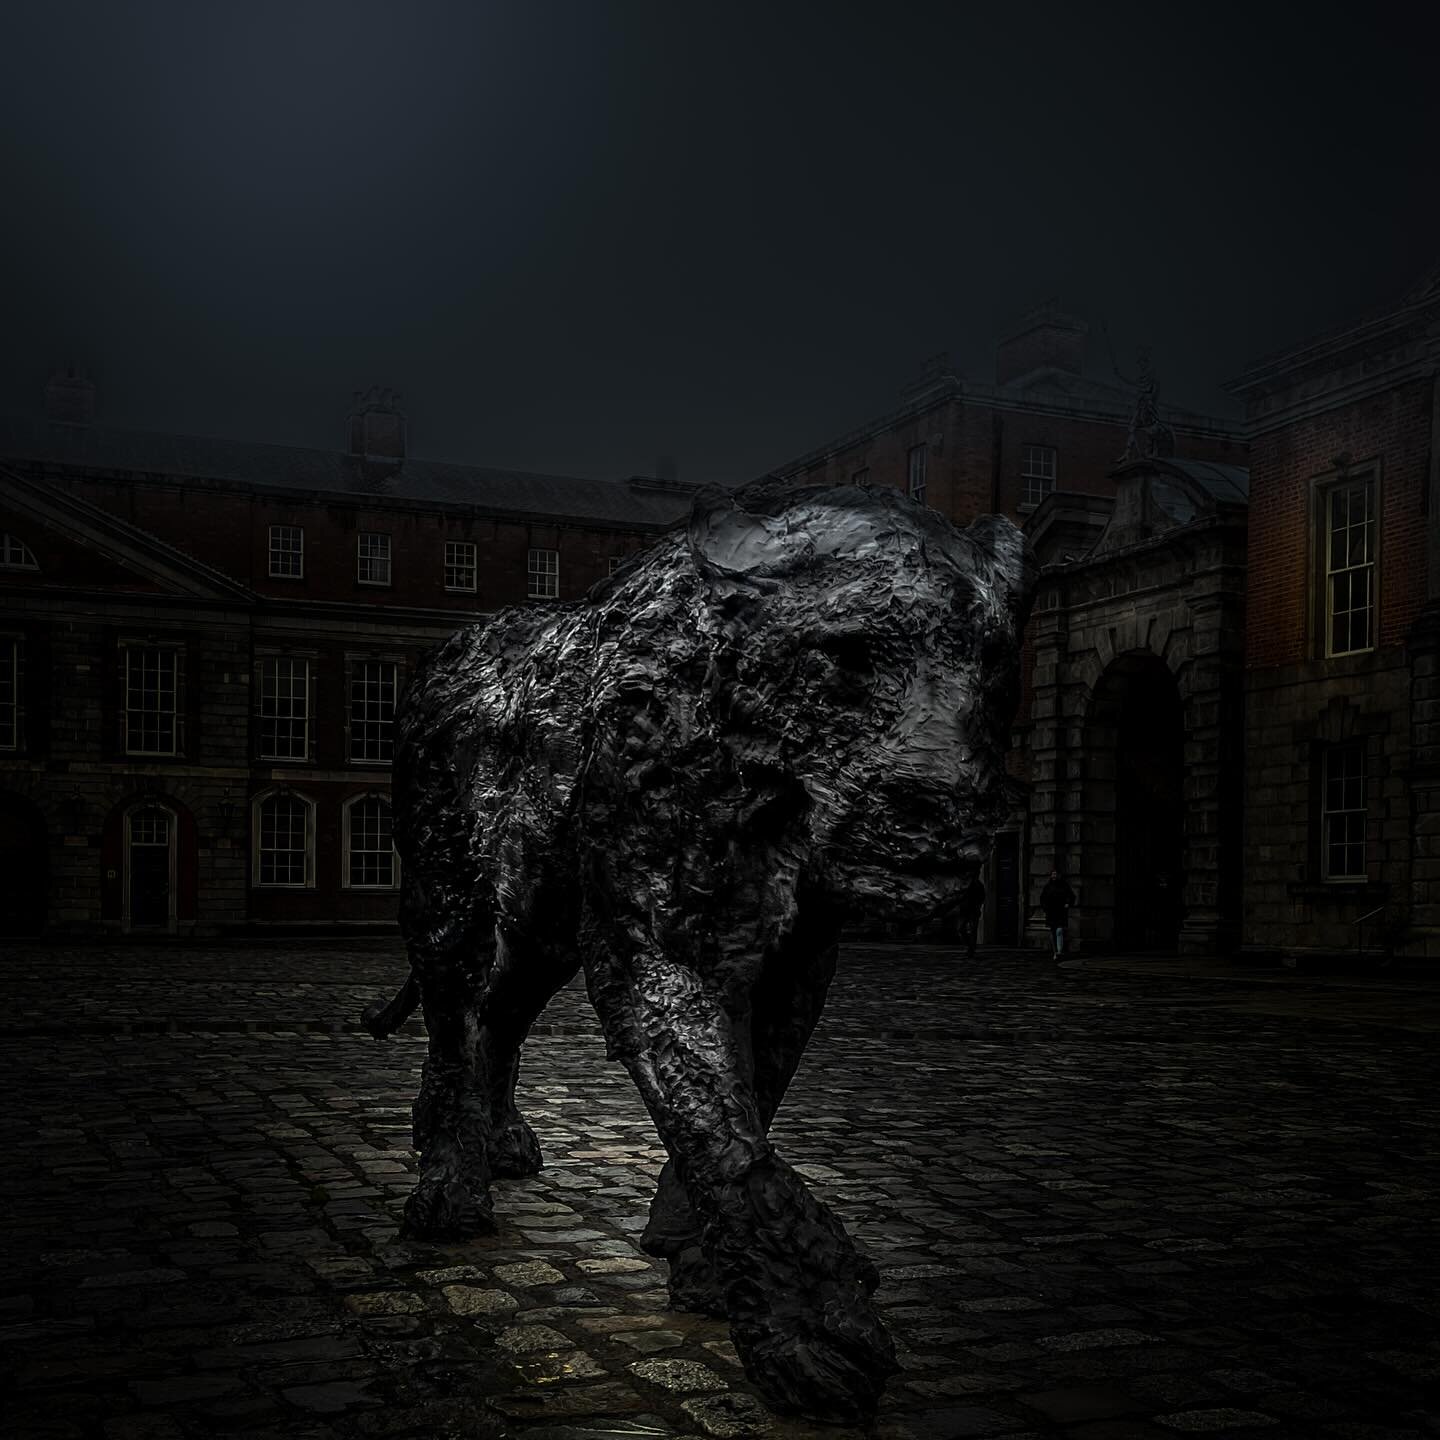 The Statue Lionesse by Davide Rivalta stalking the courtyard at Dublin Castle at night.